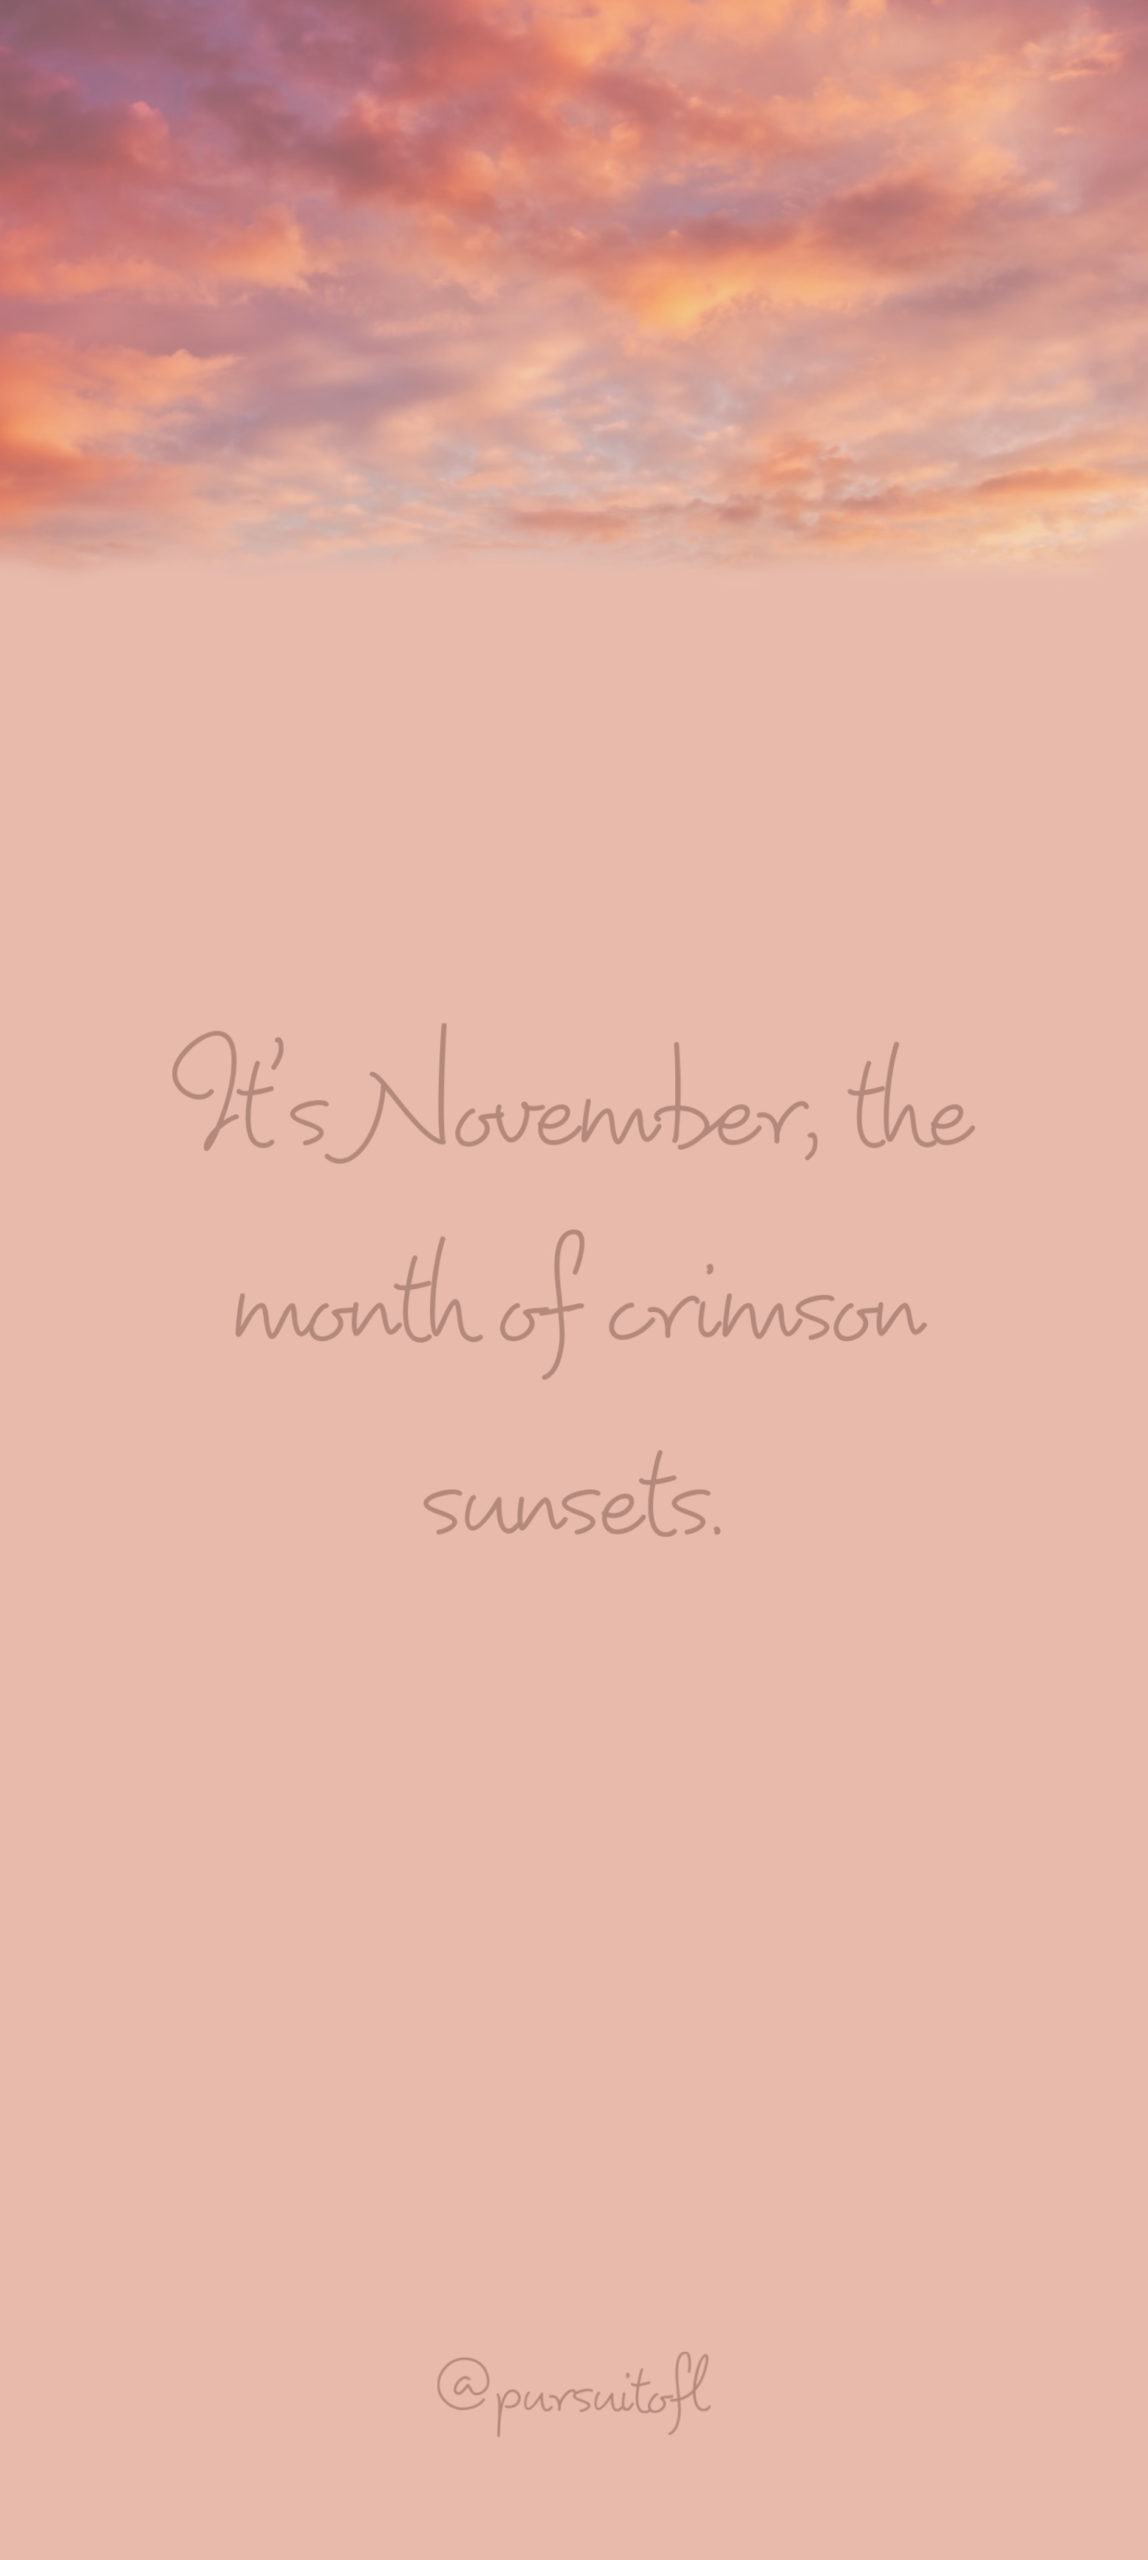 November crimson sunsets quote phone wallpaper with crimson sky.